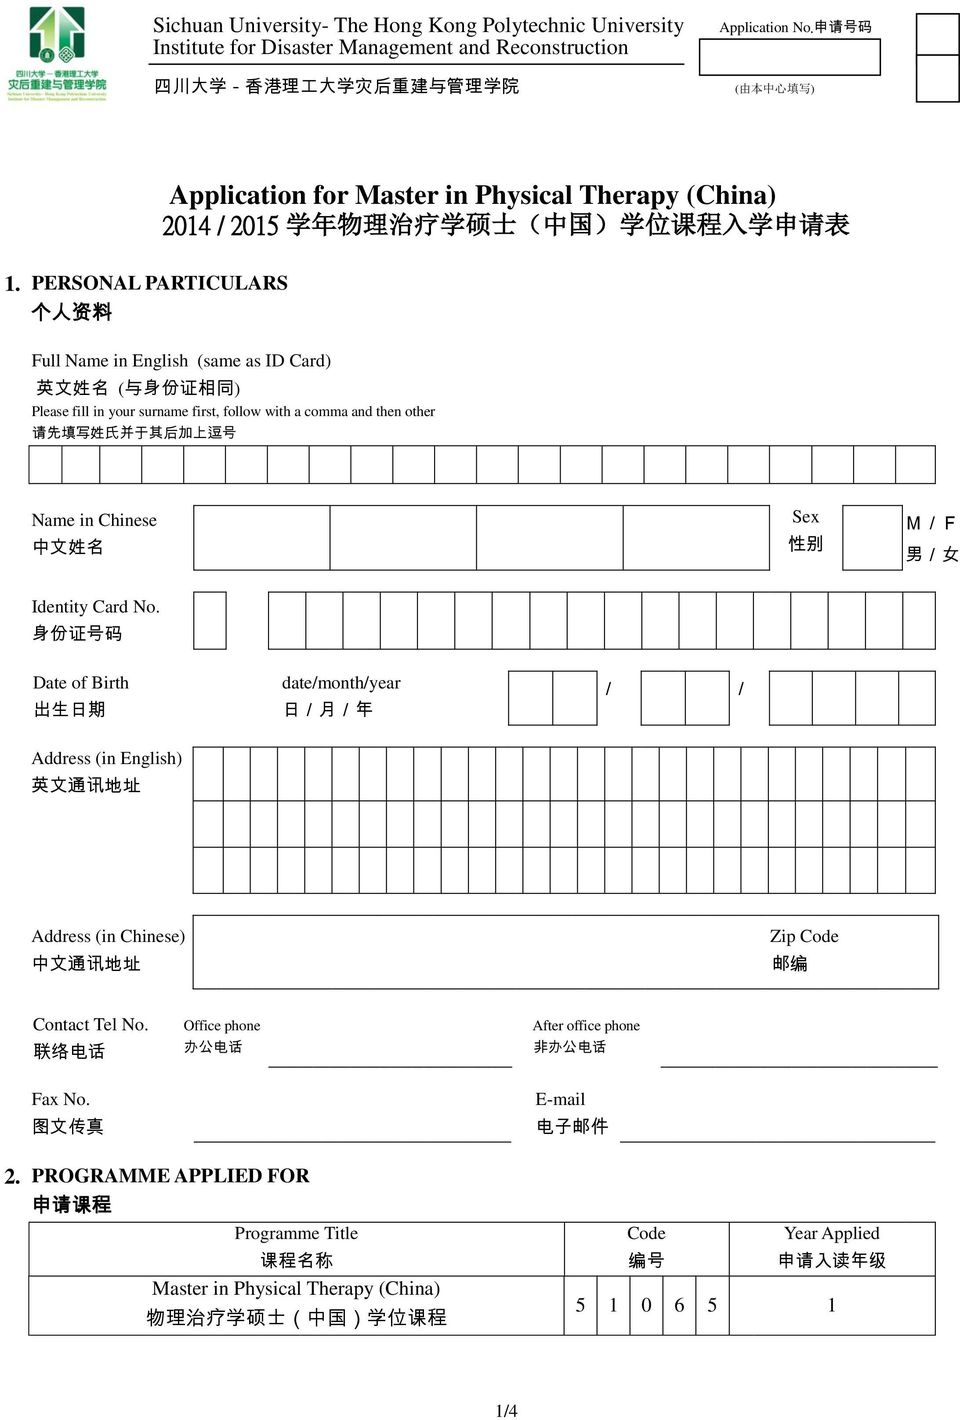 Please fill in your surname first, follow with a comma and then other 请 先 填 写 姓 氏 并 于 其 后 加 上 逗 号 Name in Chinese 中 文 姓 名 Sex 性 别 M/F 男 / 女 Identity Card No.